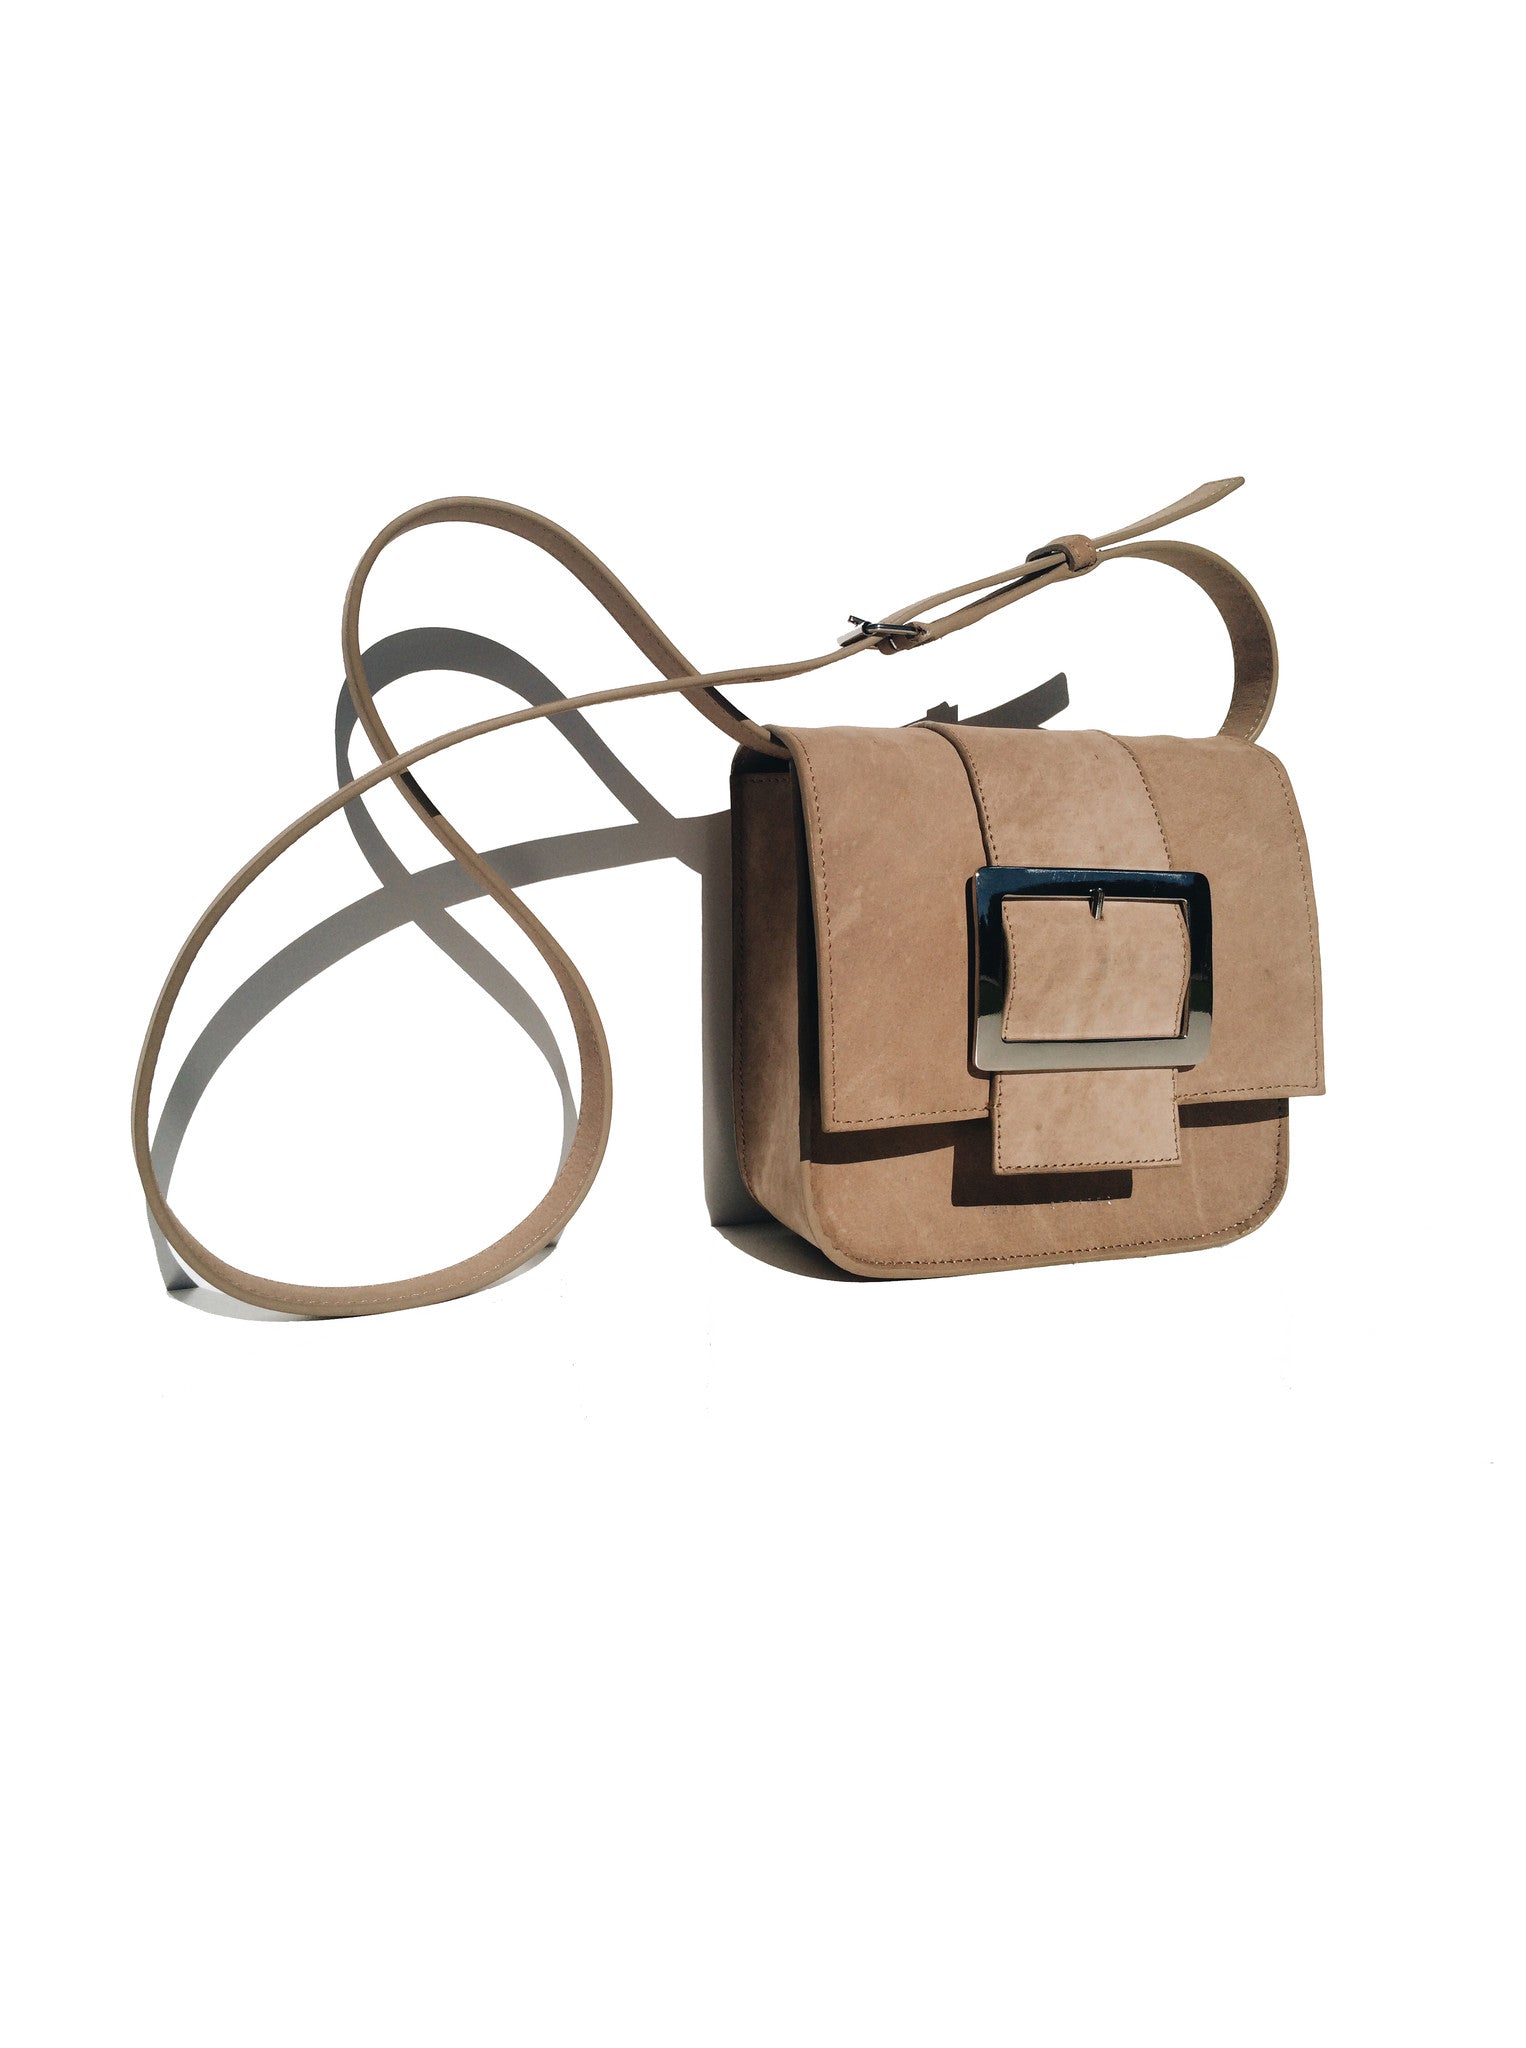 Kai Leather Bag - Adjustable and removable strap